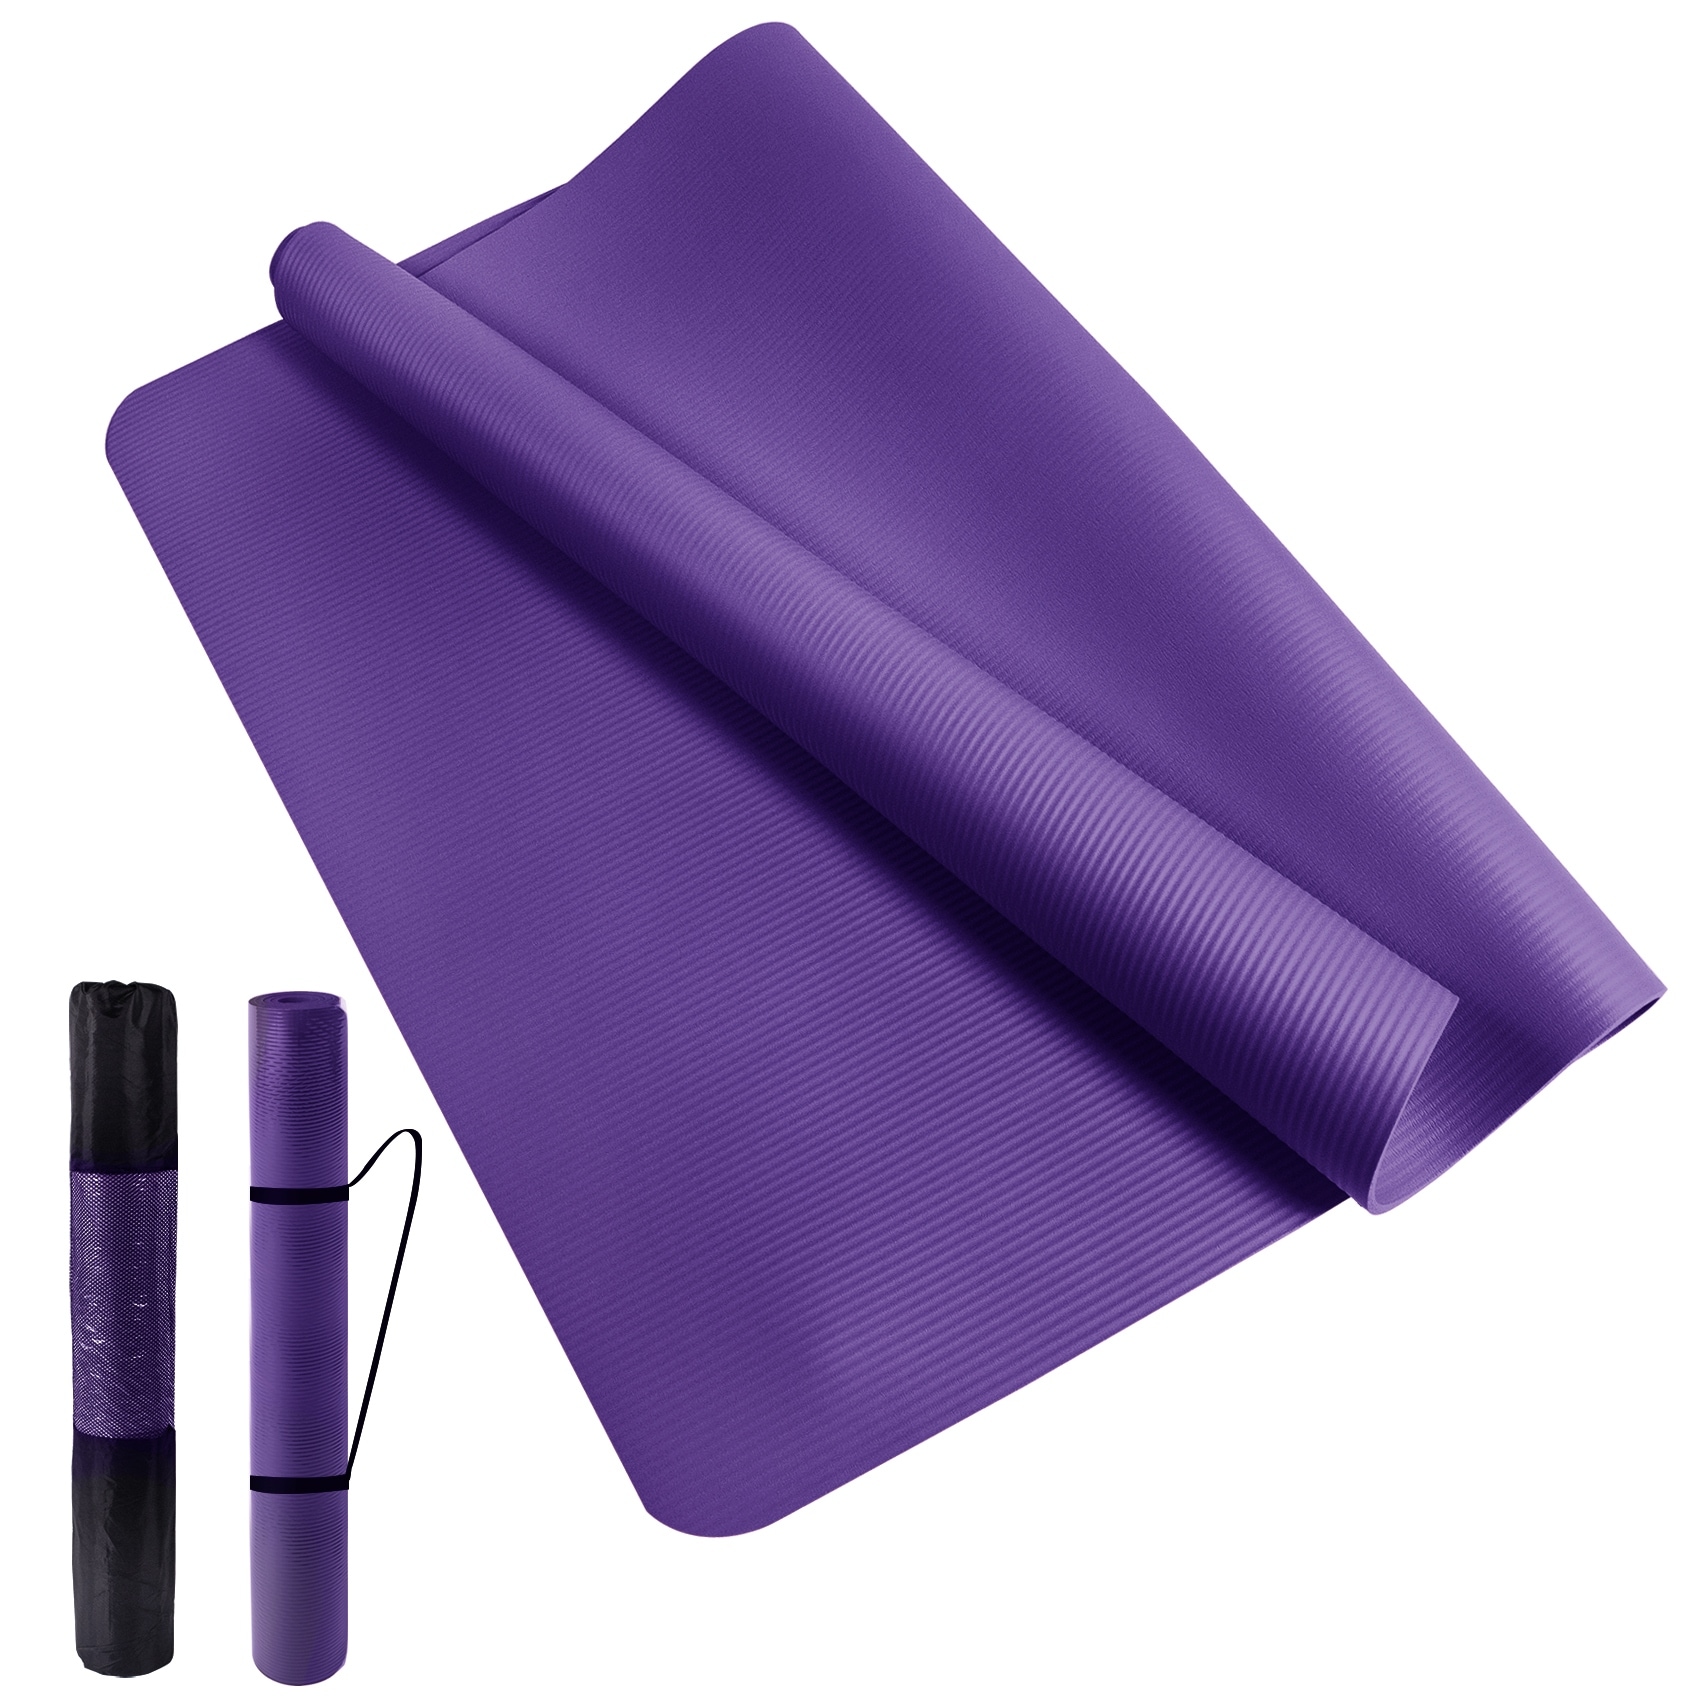 Pro Space Pink High Density Large Yoga Mat 79 in. L x 52 in. W x